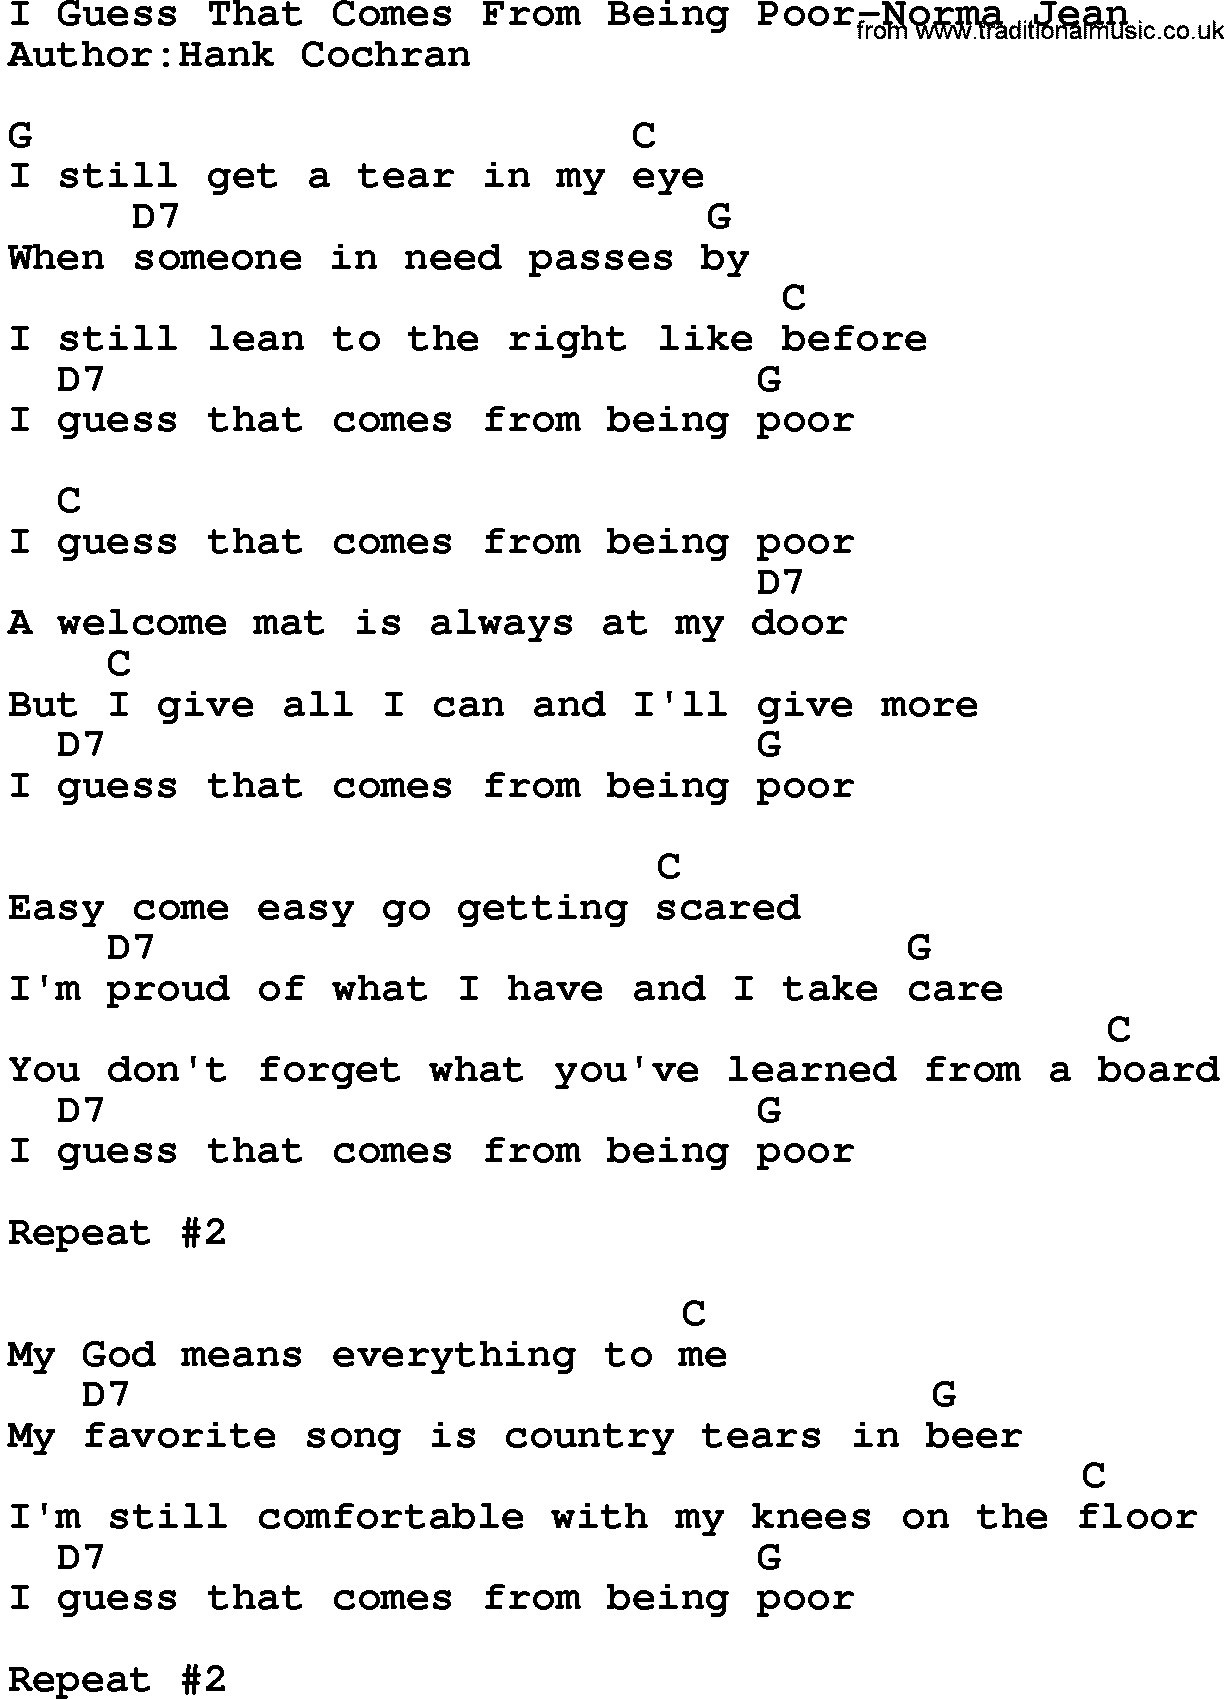 Country music song: I Guess That Comes From Being Poor-Norma Jean lyrics and chords